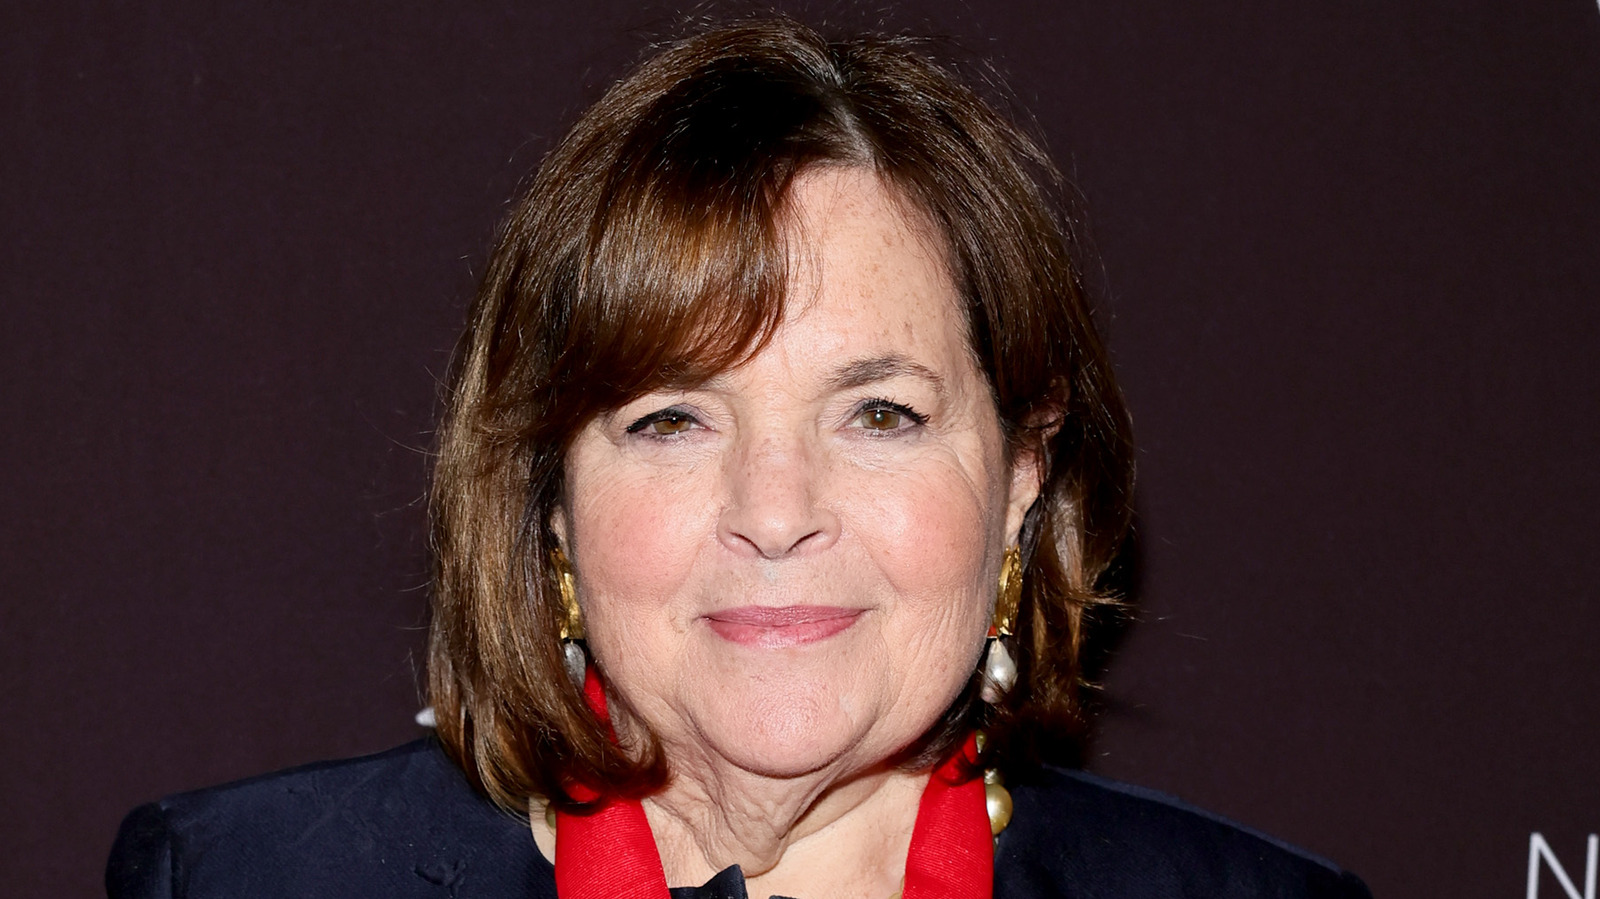 Ina Garten's Favorite Day Of The Week To Cook For Friends